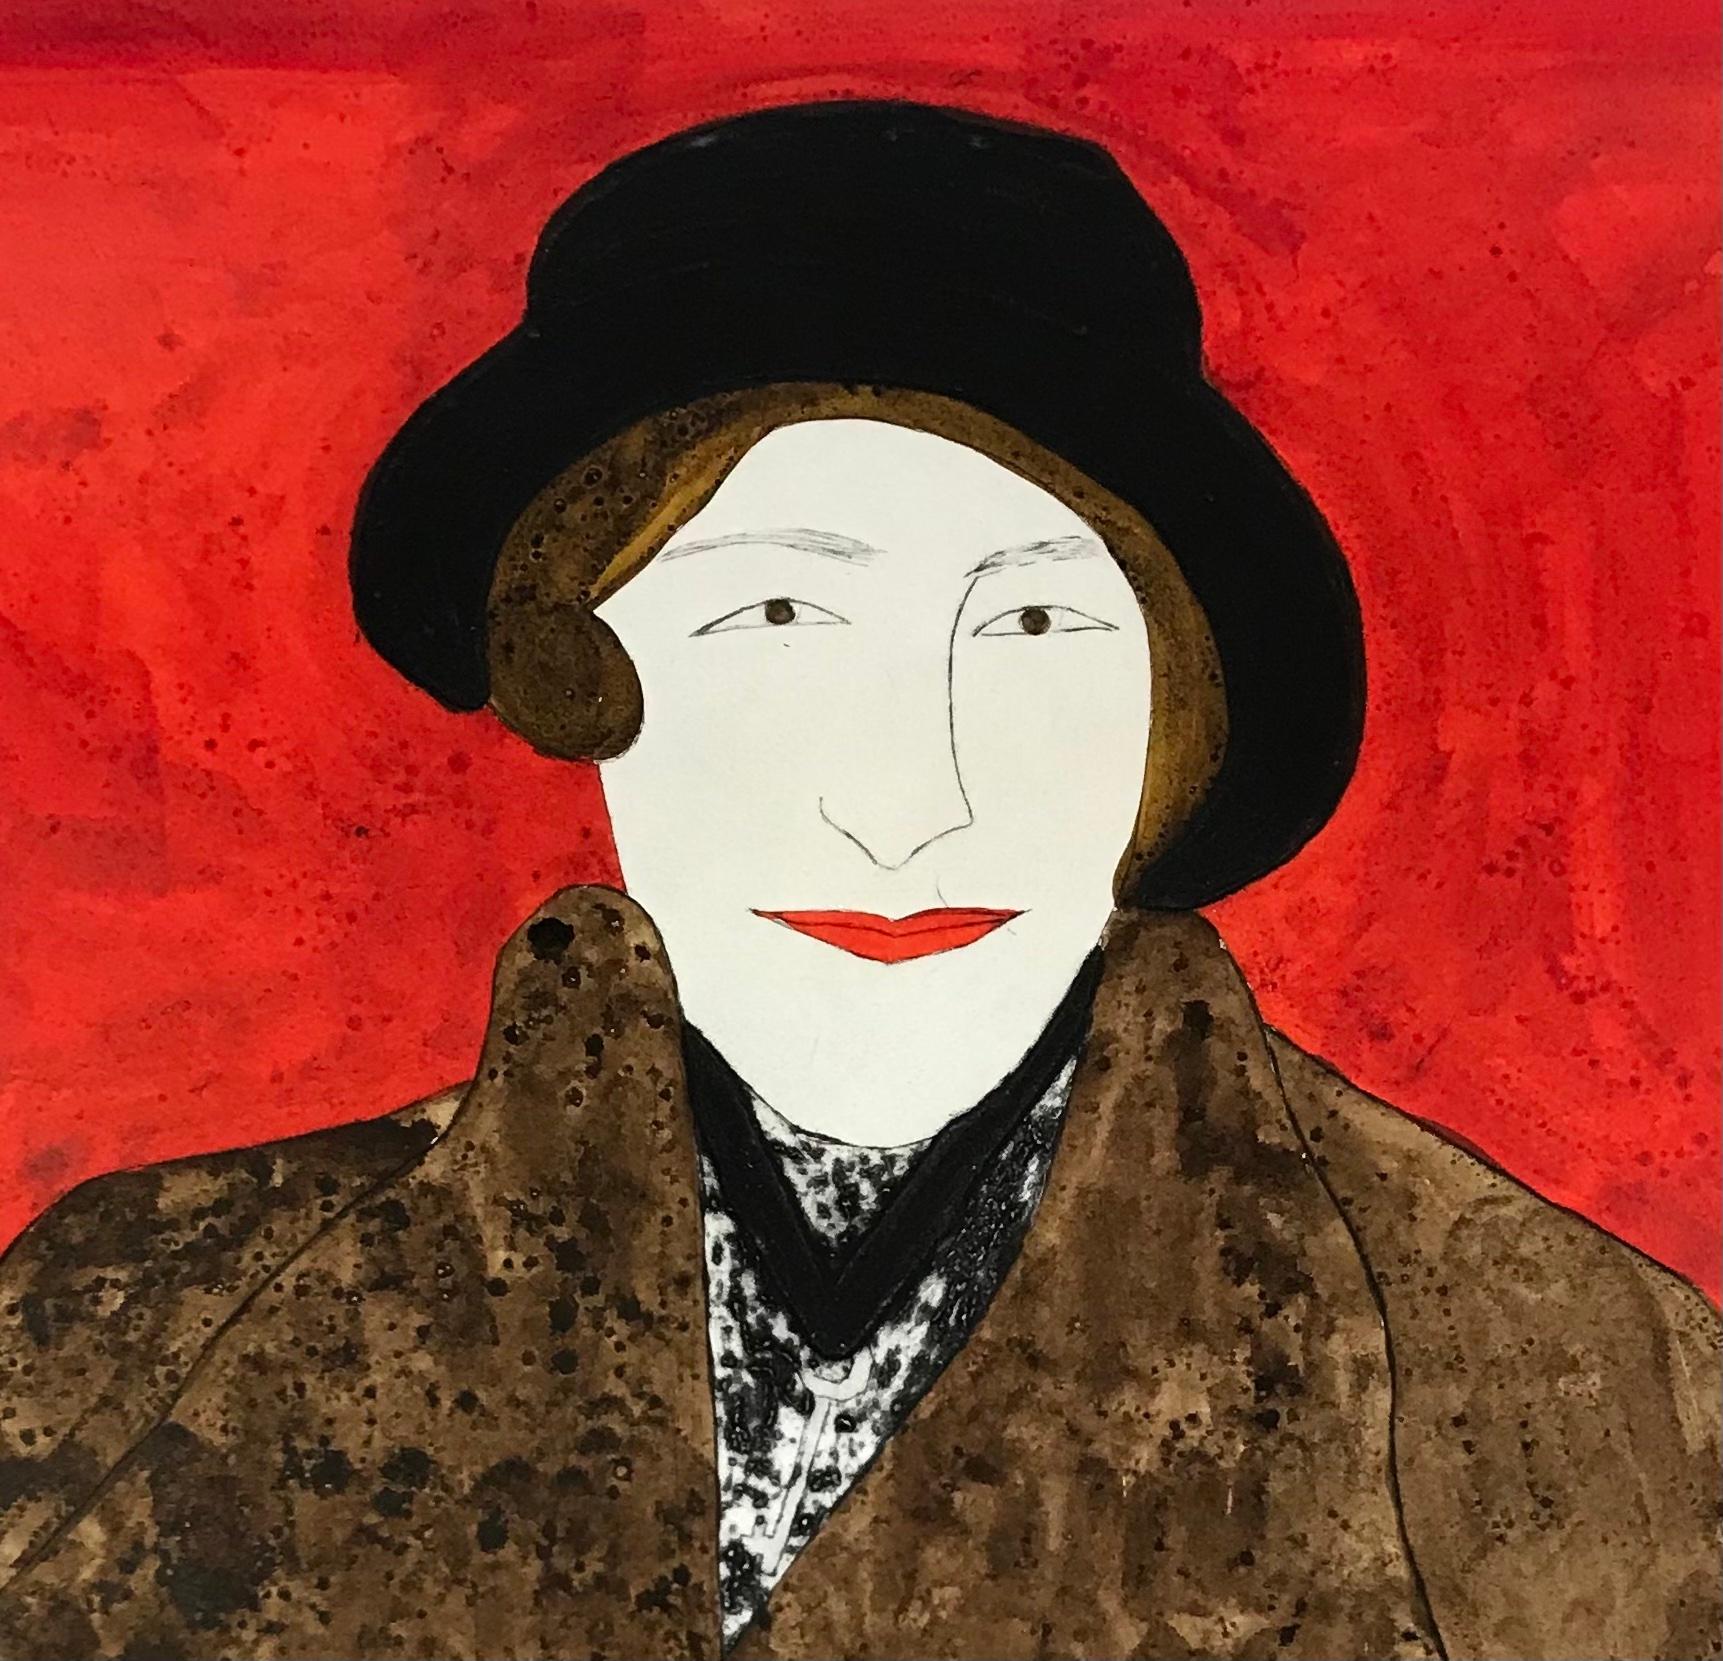 Agatha Christie is a hand coloured limited edition drypoint etching by Kate Boxer. It shows the icnonic writer in a black hat and brown fur coat against a red backdrop.

Dame Agatha Christie was an English writer known for her 66 detective novels